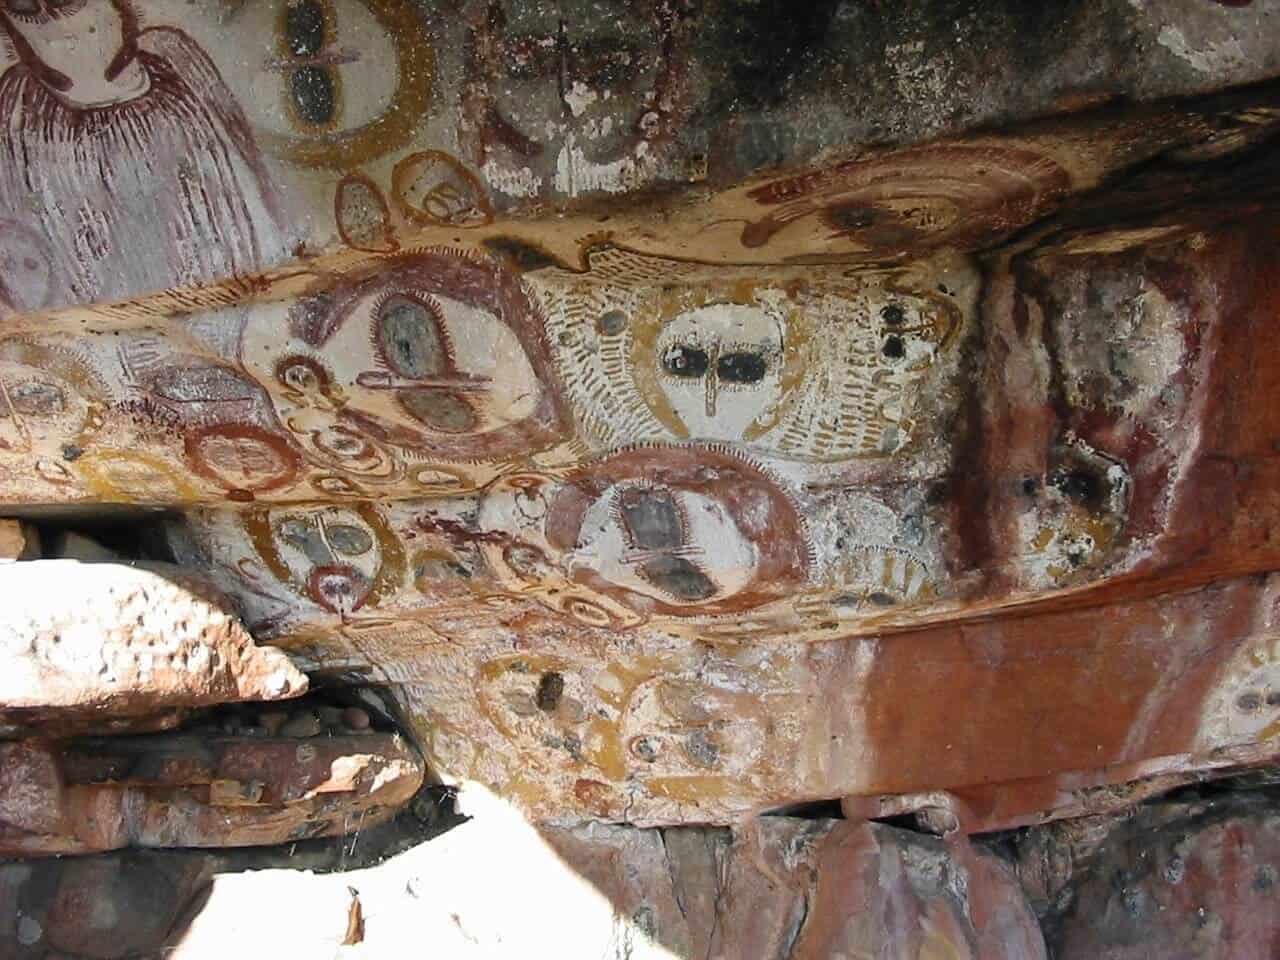 wandjinas- - Australian Cave paintings may be the oldest on the planet